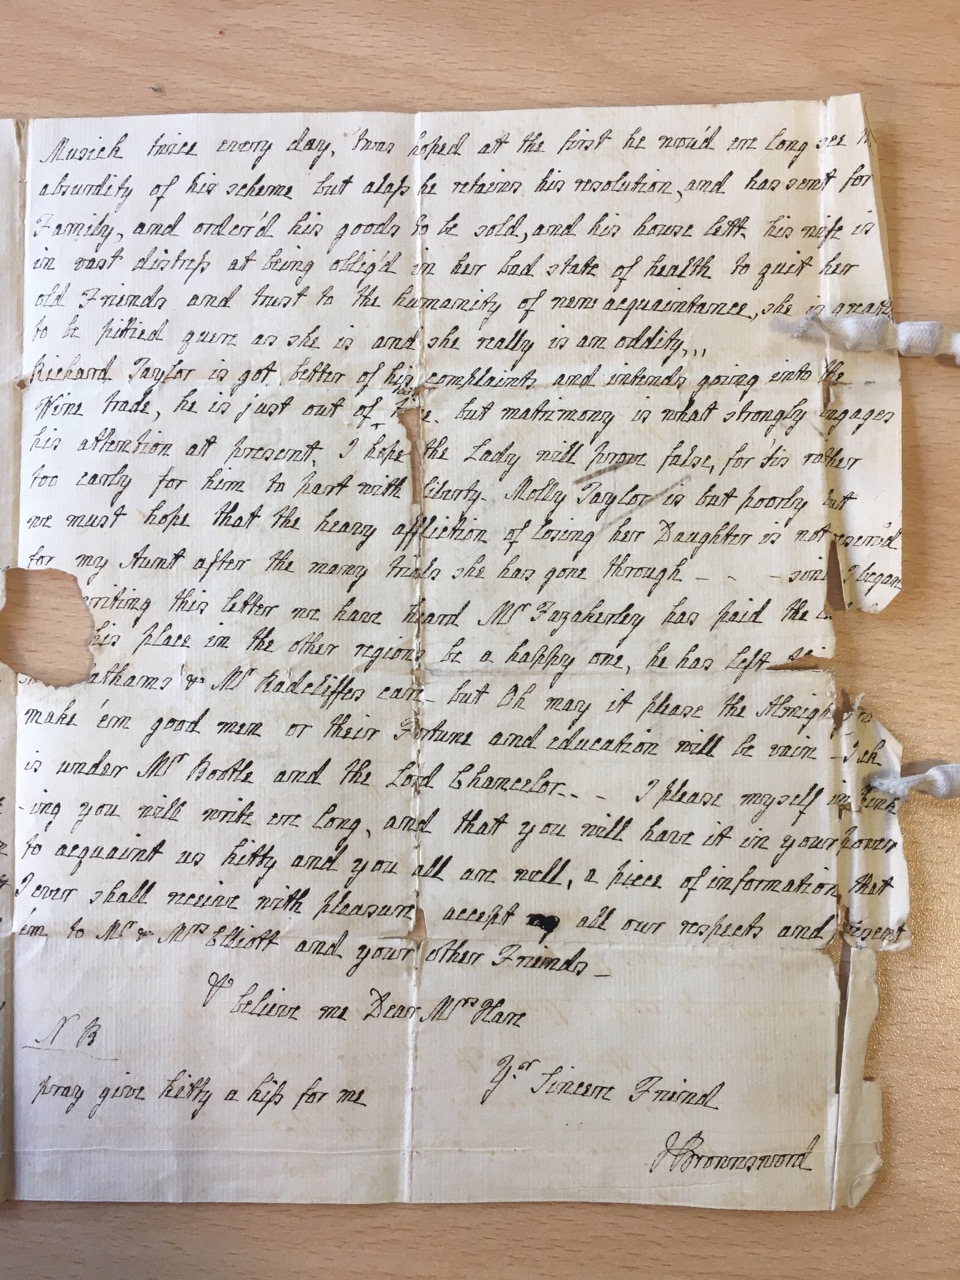 Image #3 of letter: J[enny[ Brownsword to Ann Hare, 7 June 1773